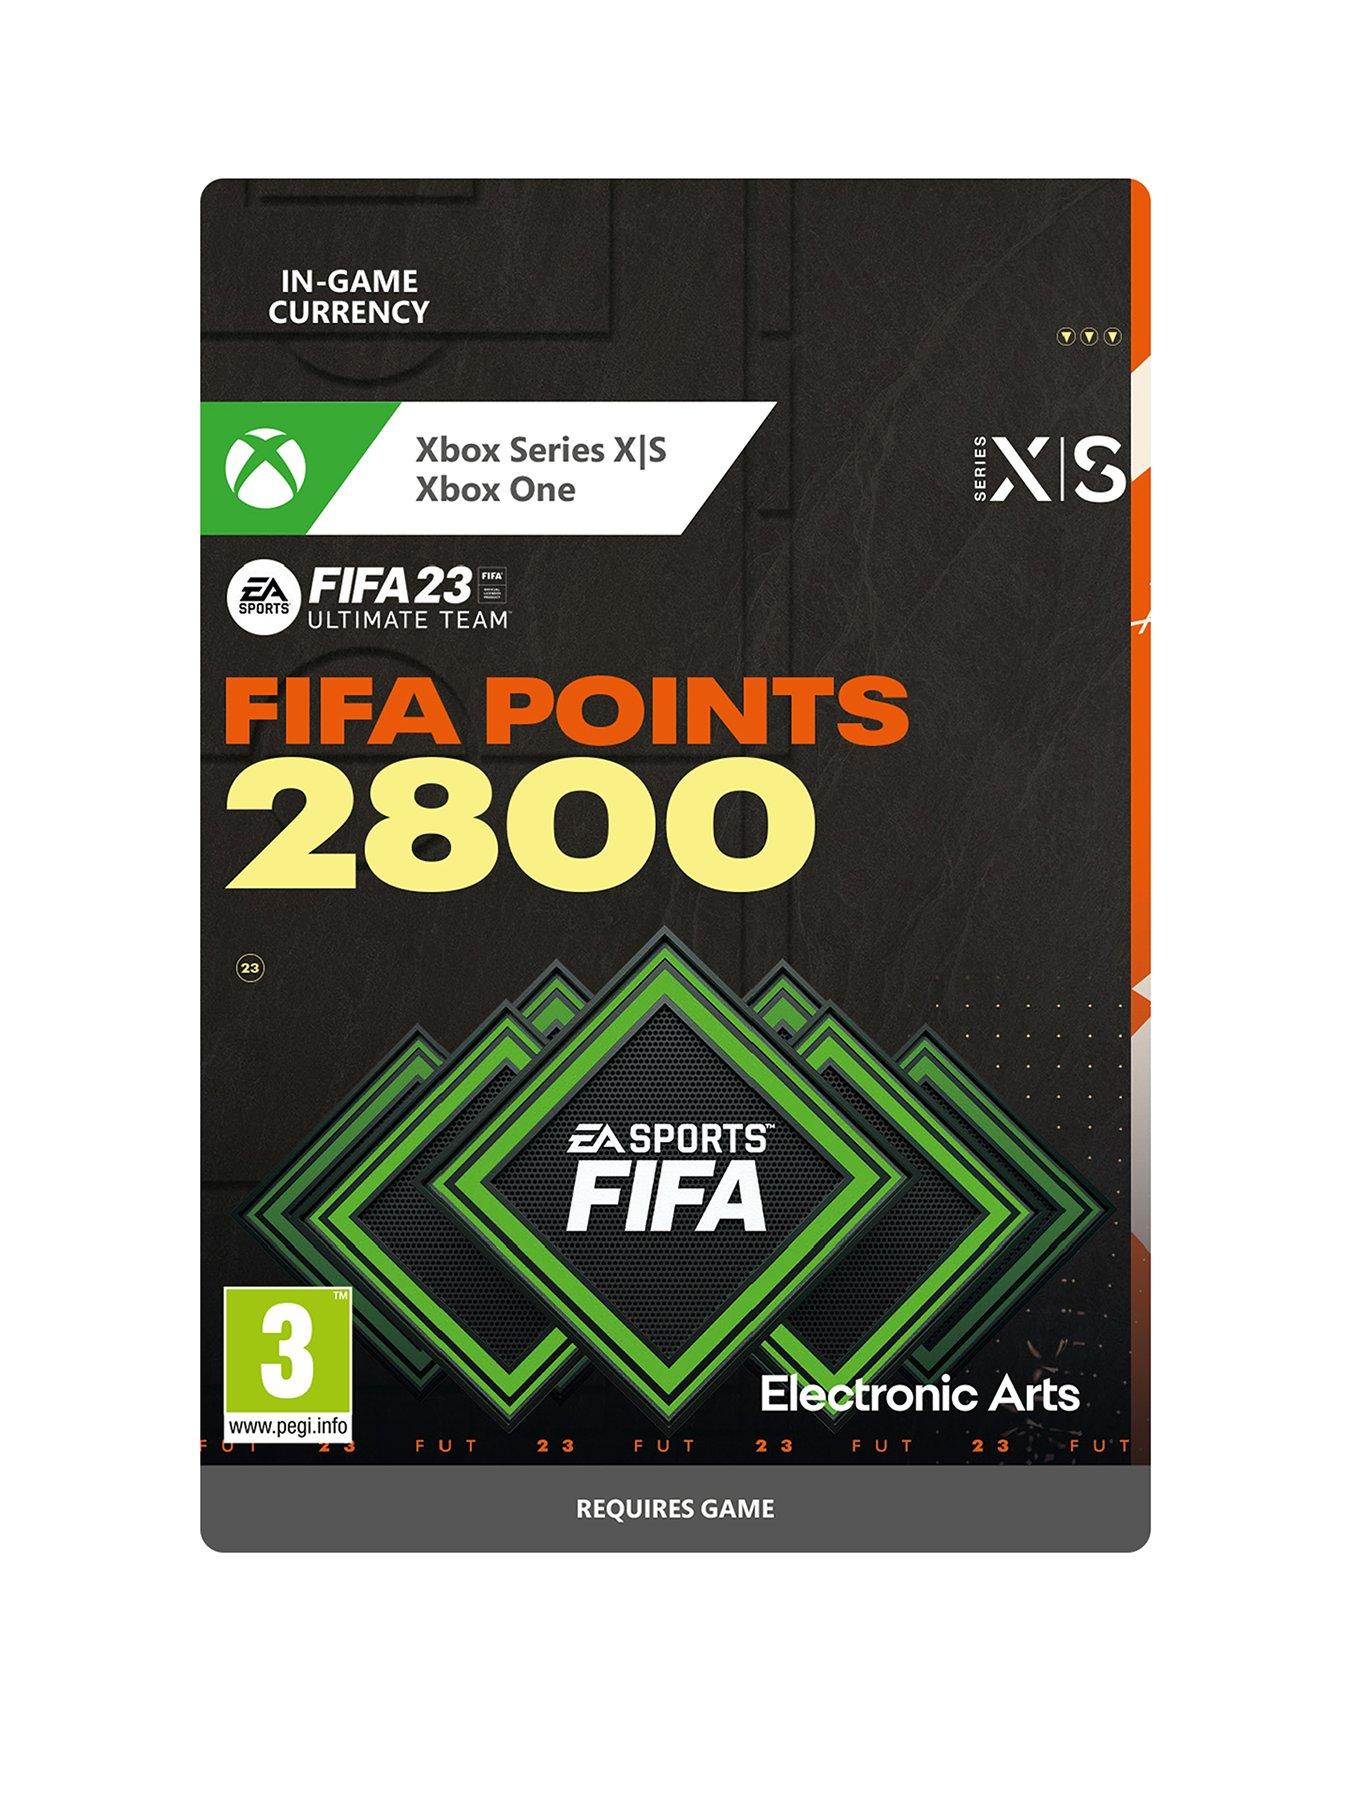 There's A Way To Save Big On FIFA 23 With Xbox Game Pass This